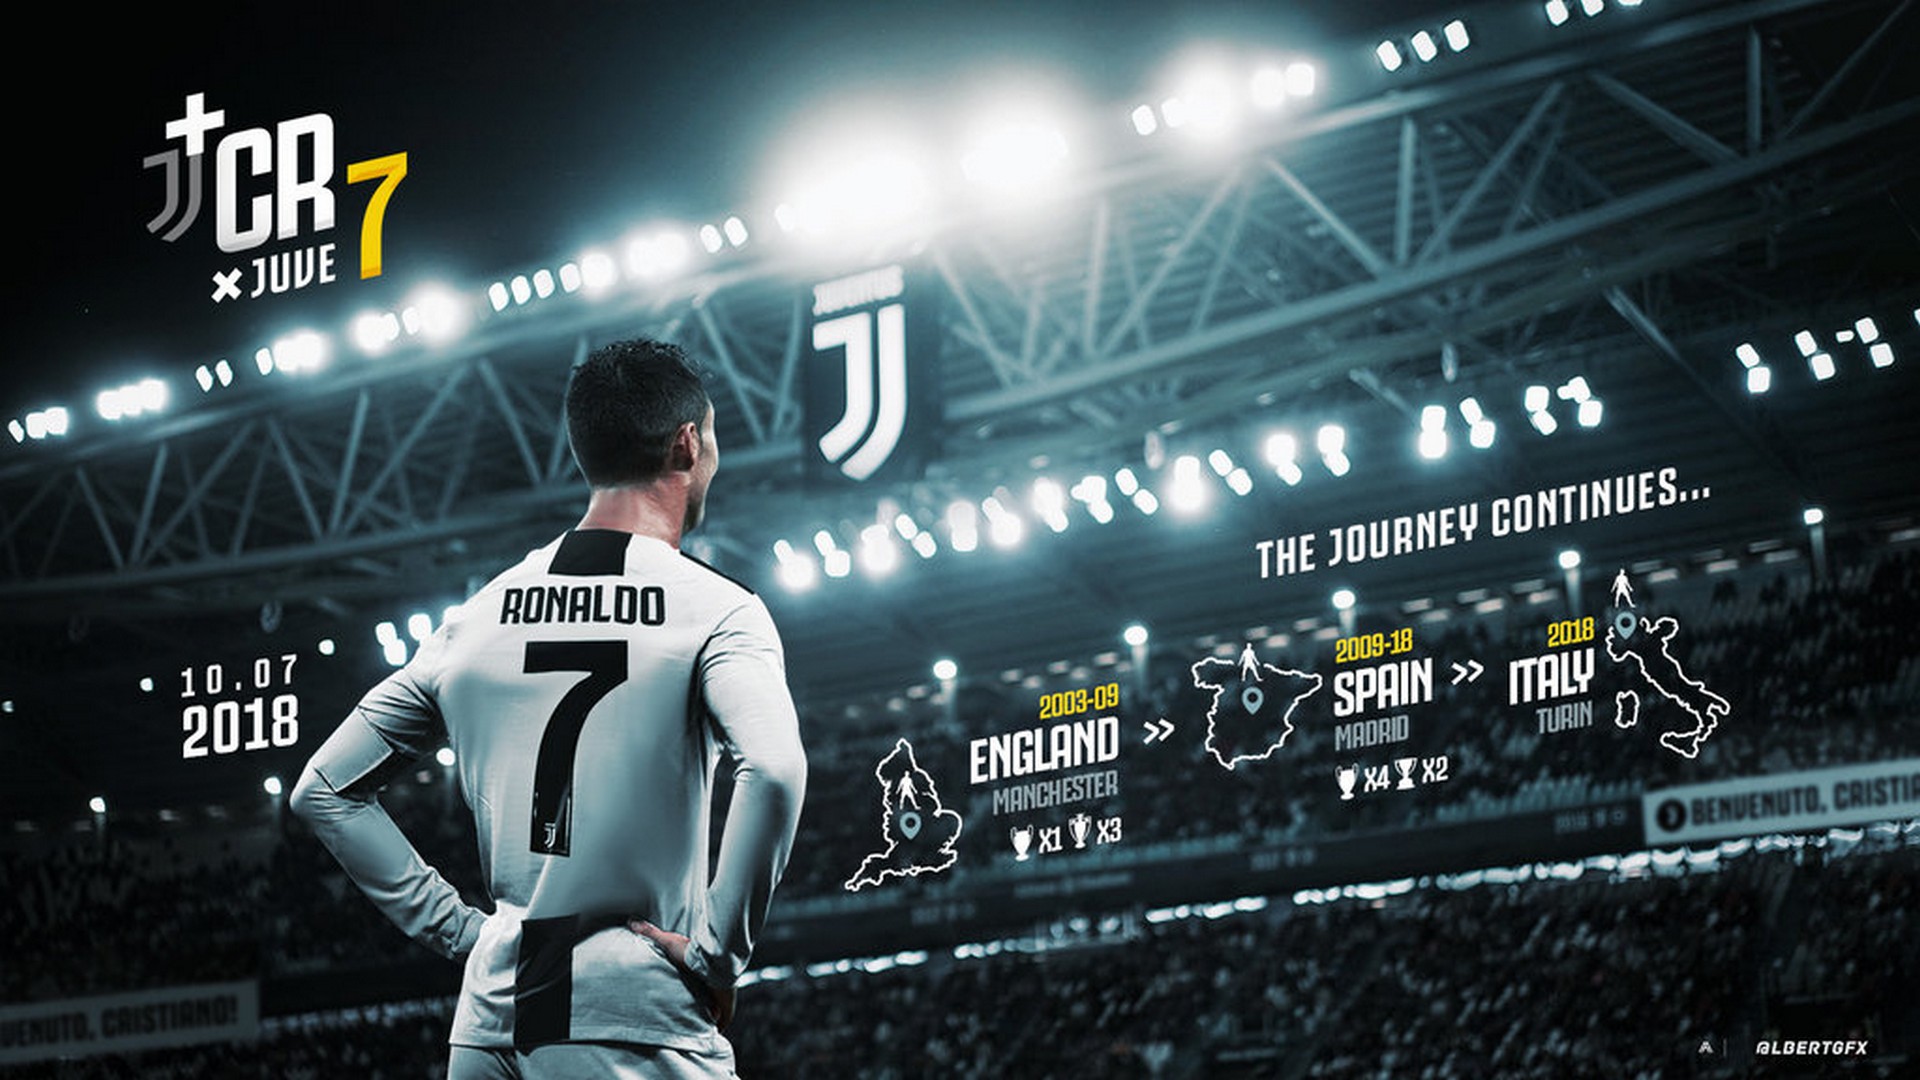 Best C Ronaldo Juventus Wallpaper with image resolution 1920x1080 pixel. You can use this wallpaper as background for your desktop Computer Screensavers, Android or iPhone smartphones